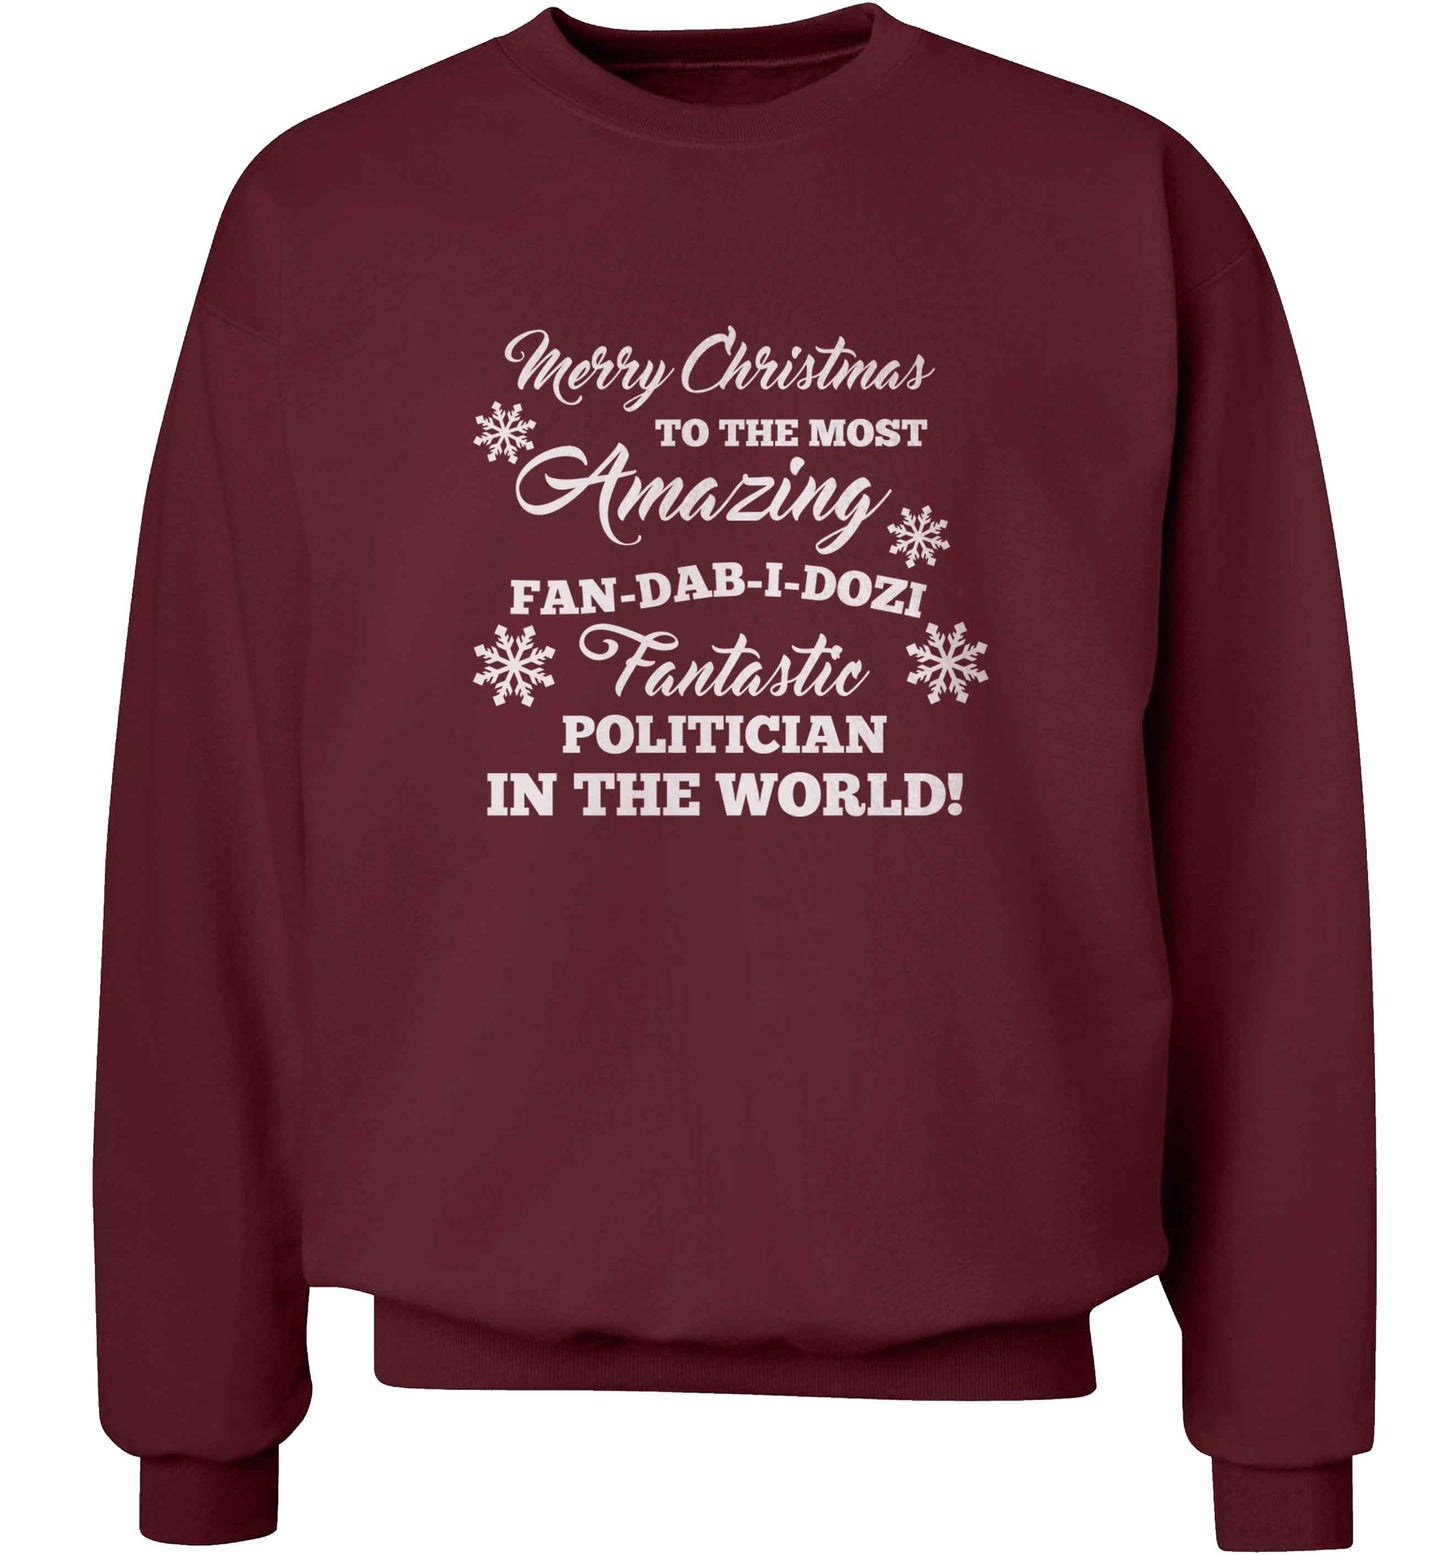 Merry Christmas to the most amazing politician in the world! adult's unisex maroon sweater 2XL